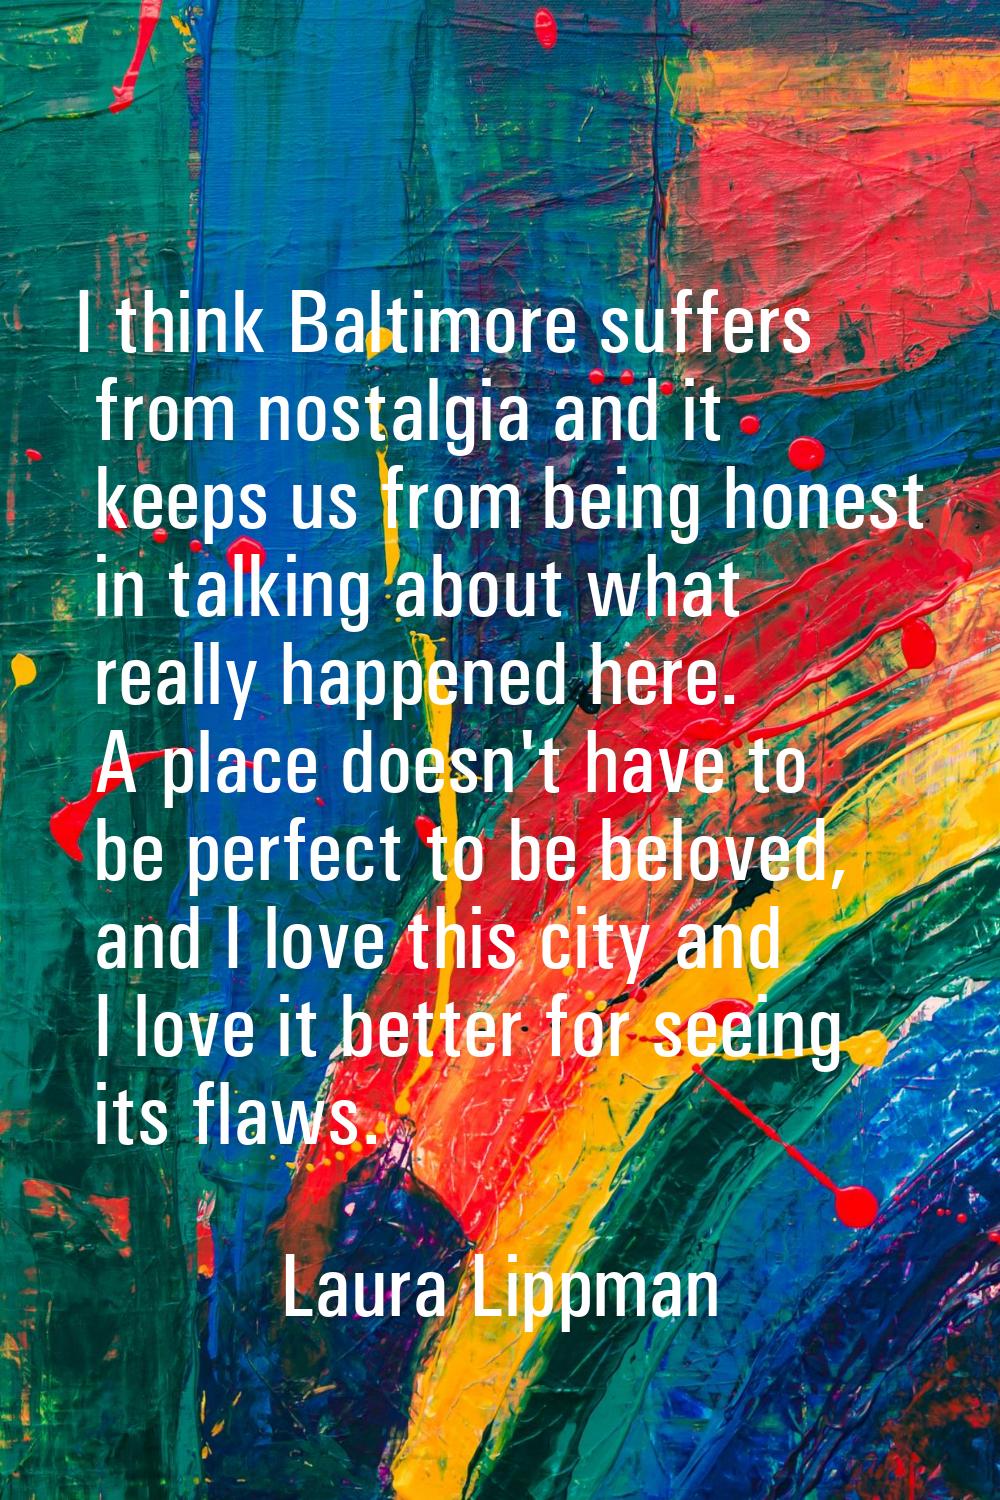 I think Baltimore suffers from nostalgia and it keeps us from being honest in talking about what re